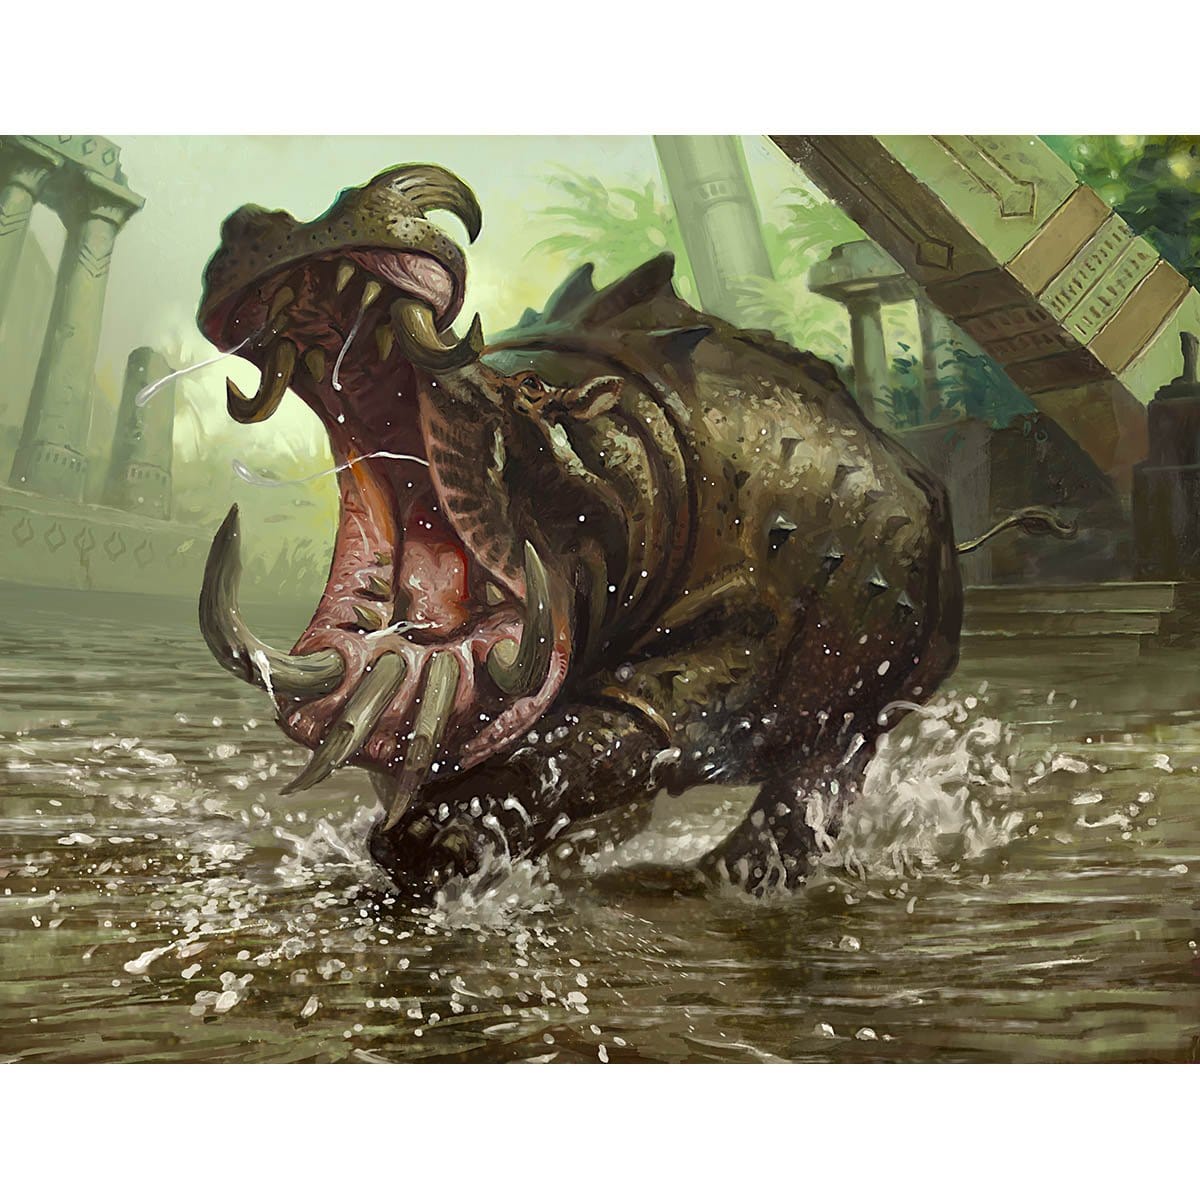 Rampaging Hippo Print - Print - Original Magic Art - Accessories for Magic the Gathering and other card games